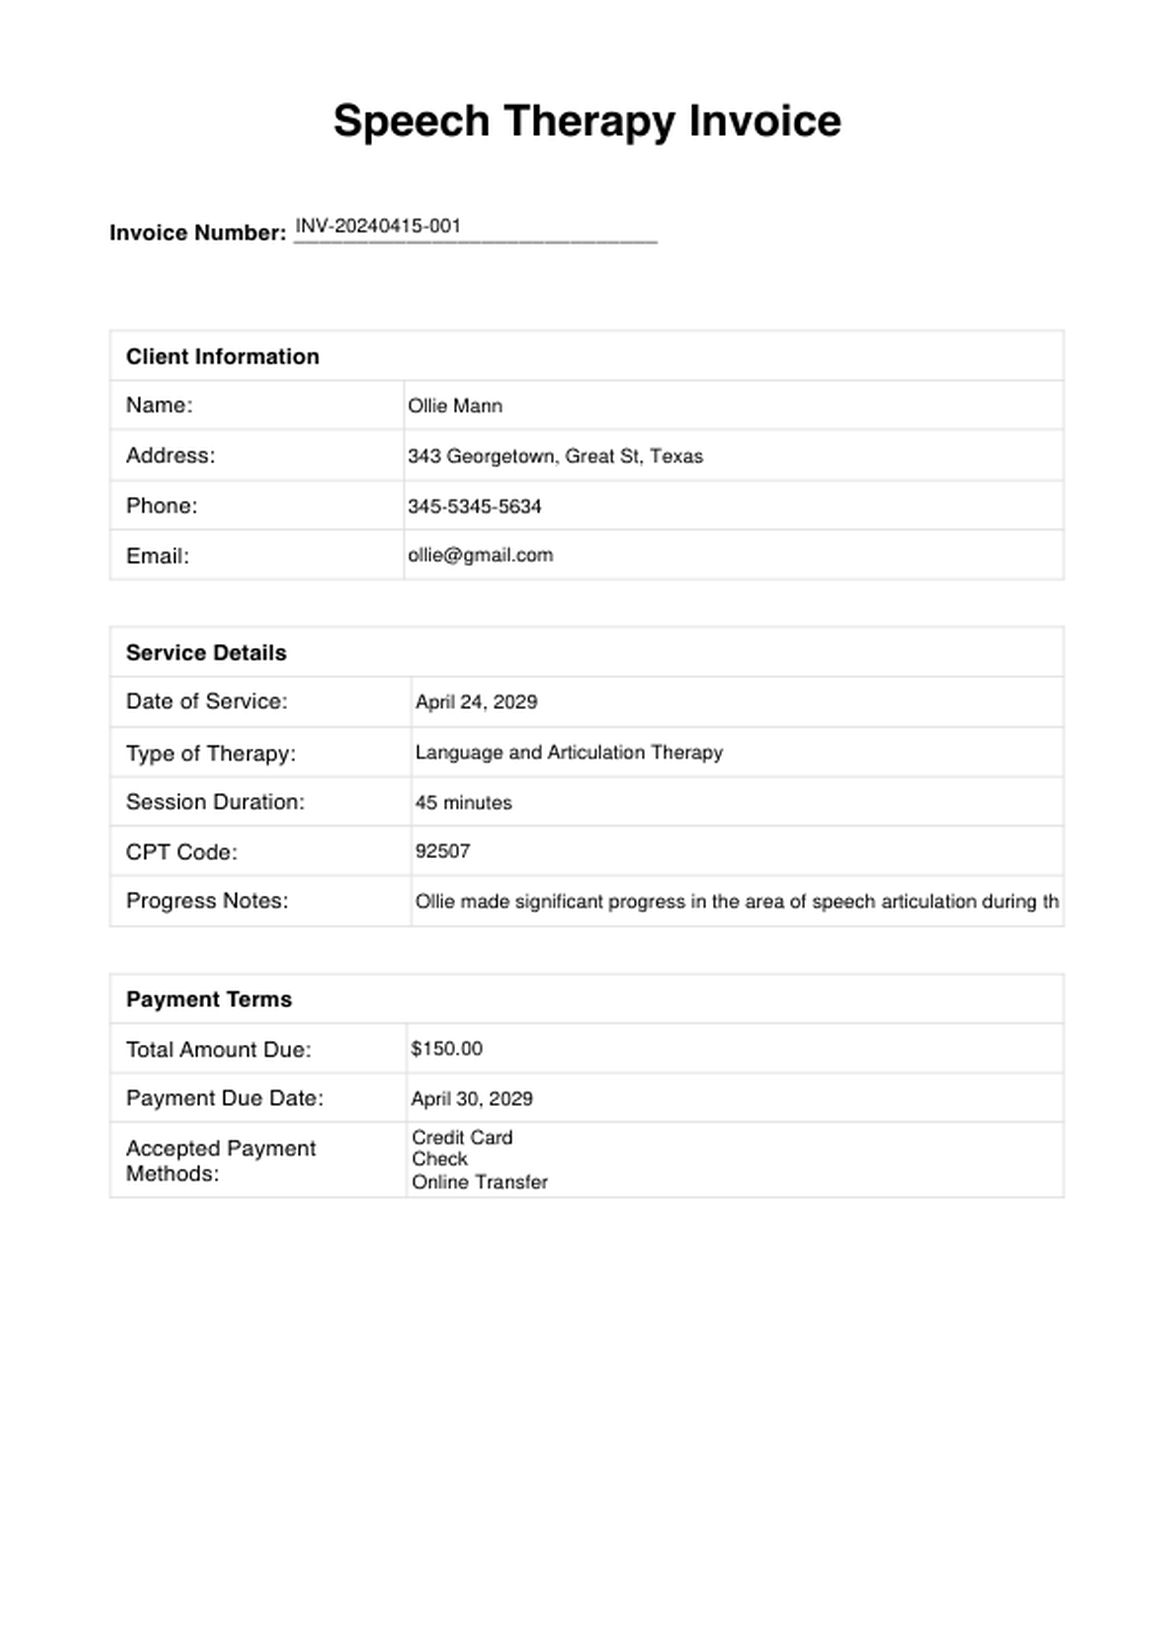 Speech Therapy Invoice Template PDF Example